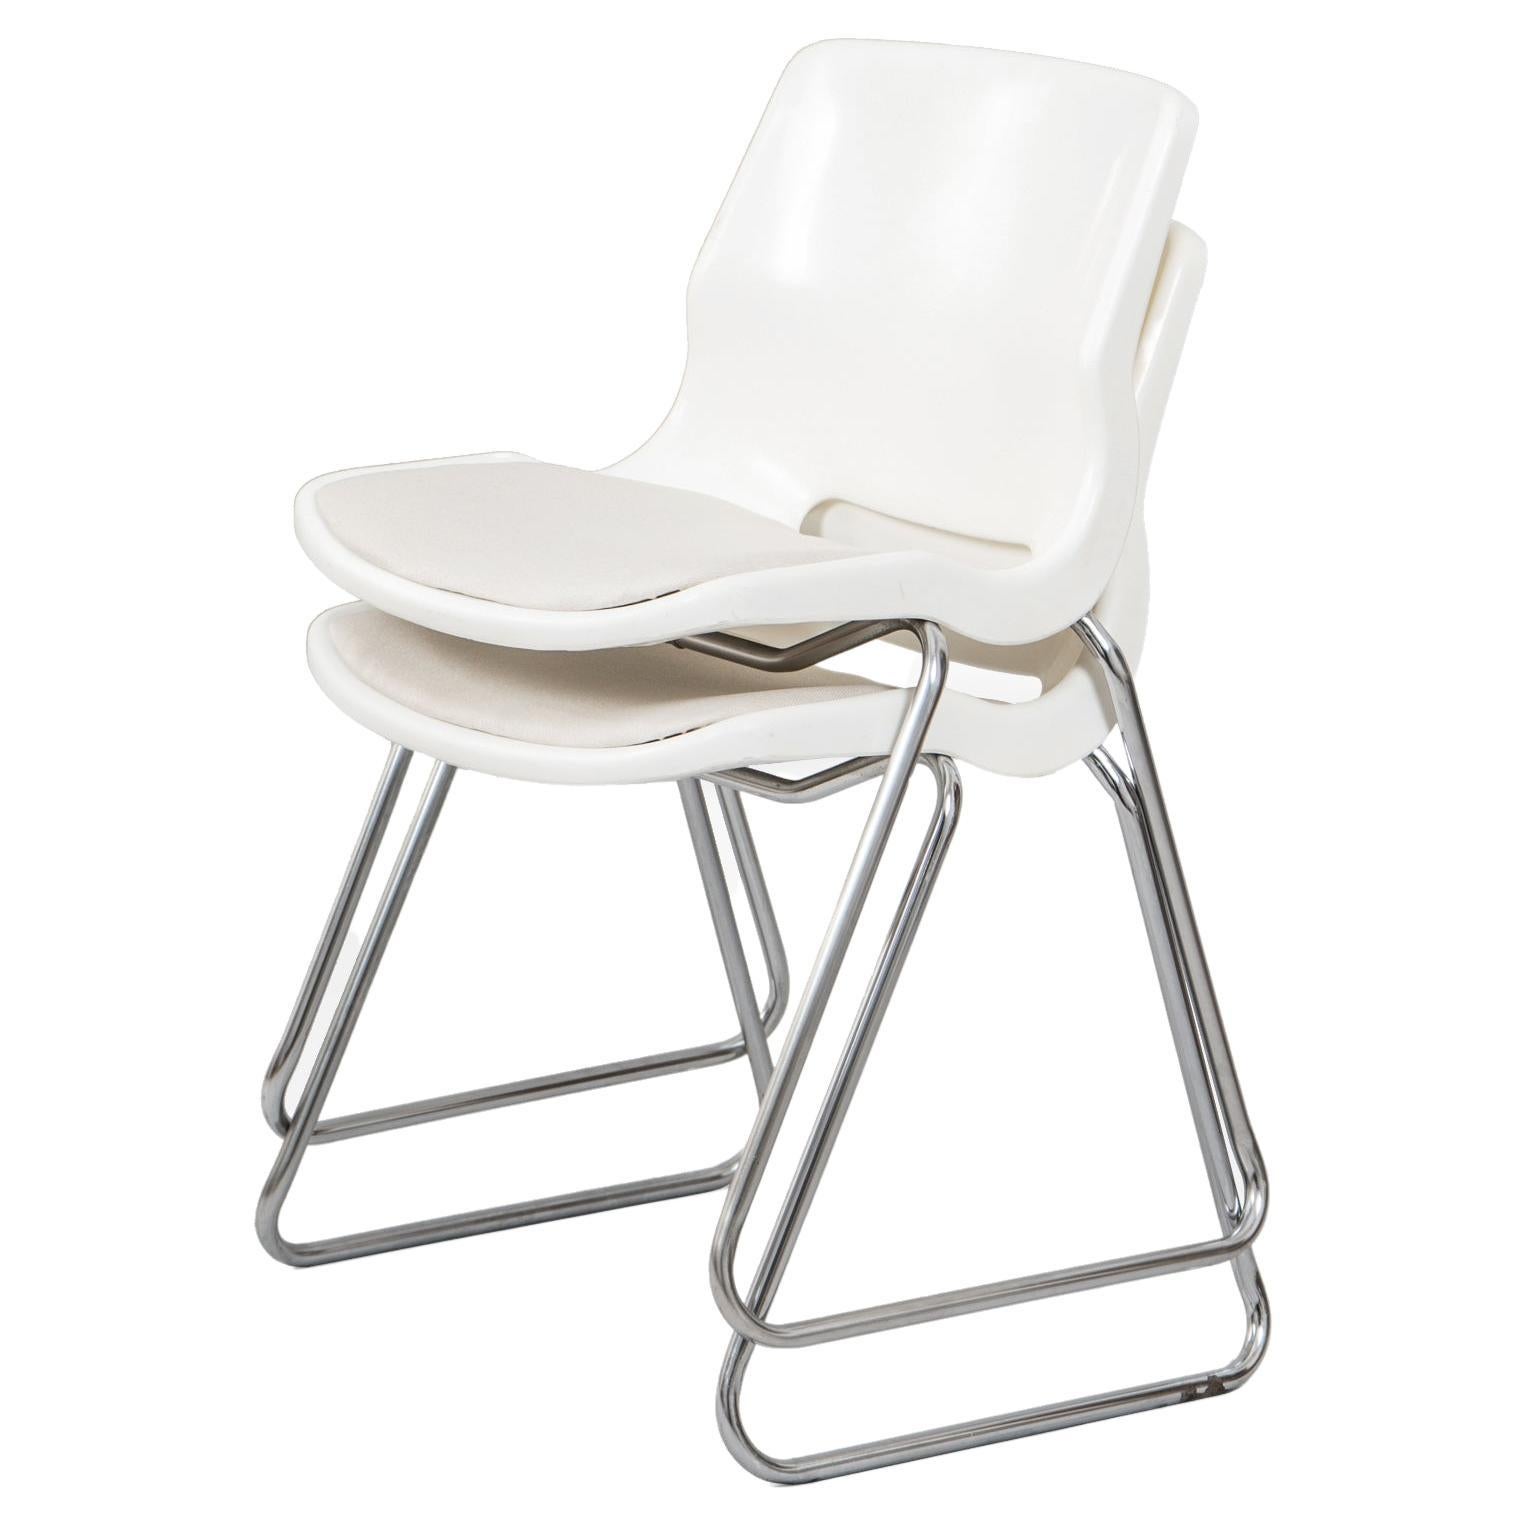 Overman Sweden Chaises